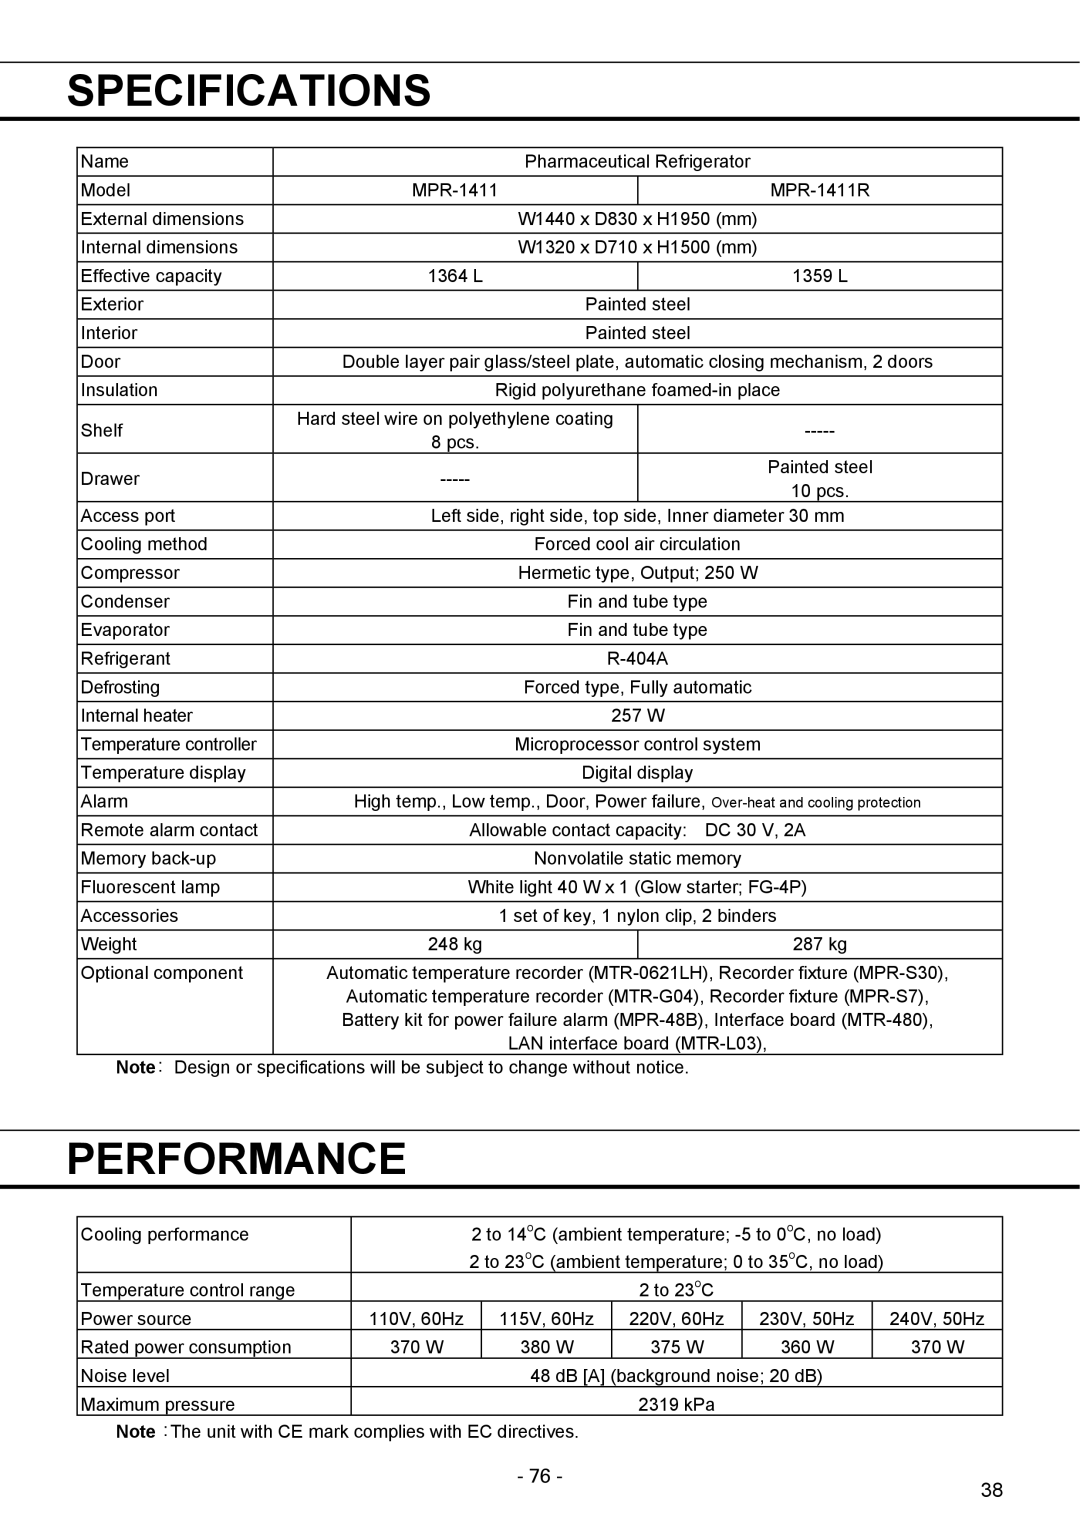 Sanyo MPR-1411R instruction manual Specifications, Performance 